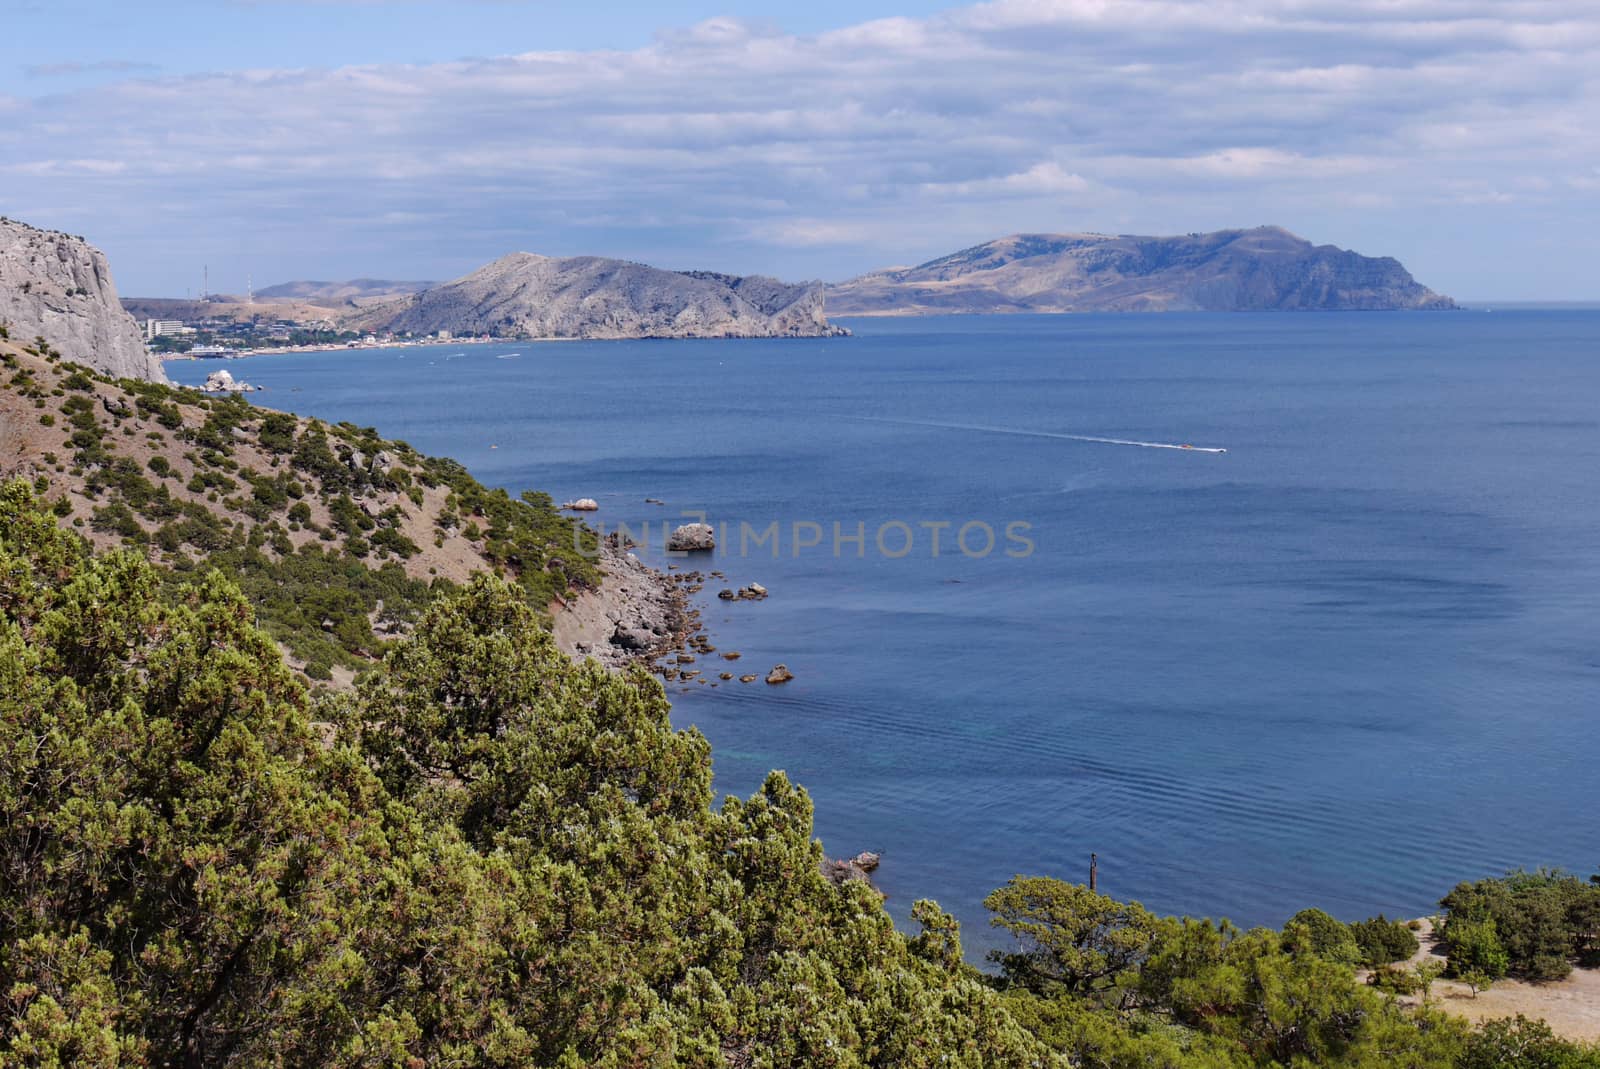 A delightful landscape on the sea bay located between the slopes of the mountains